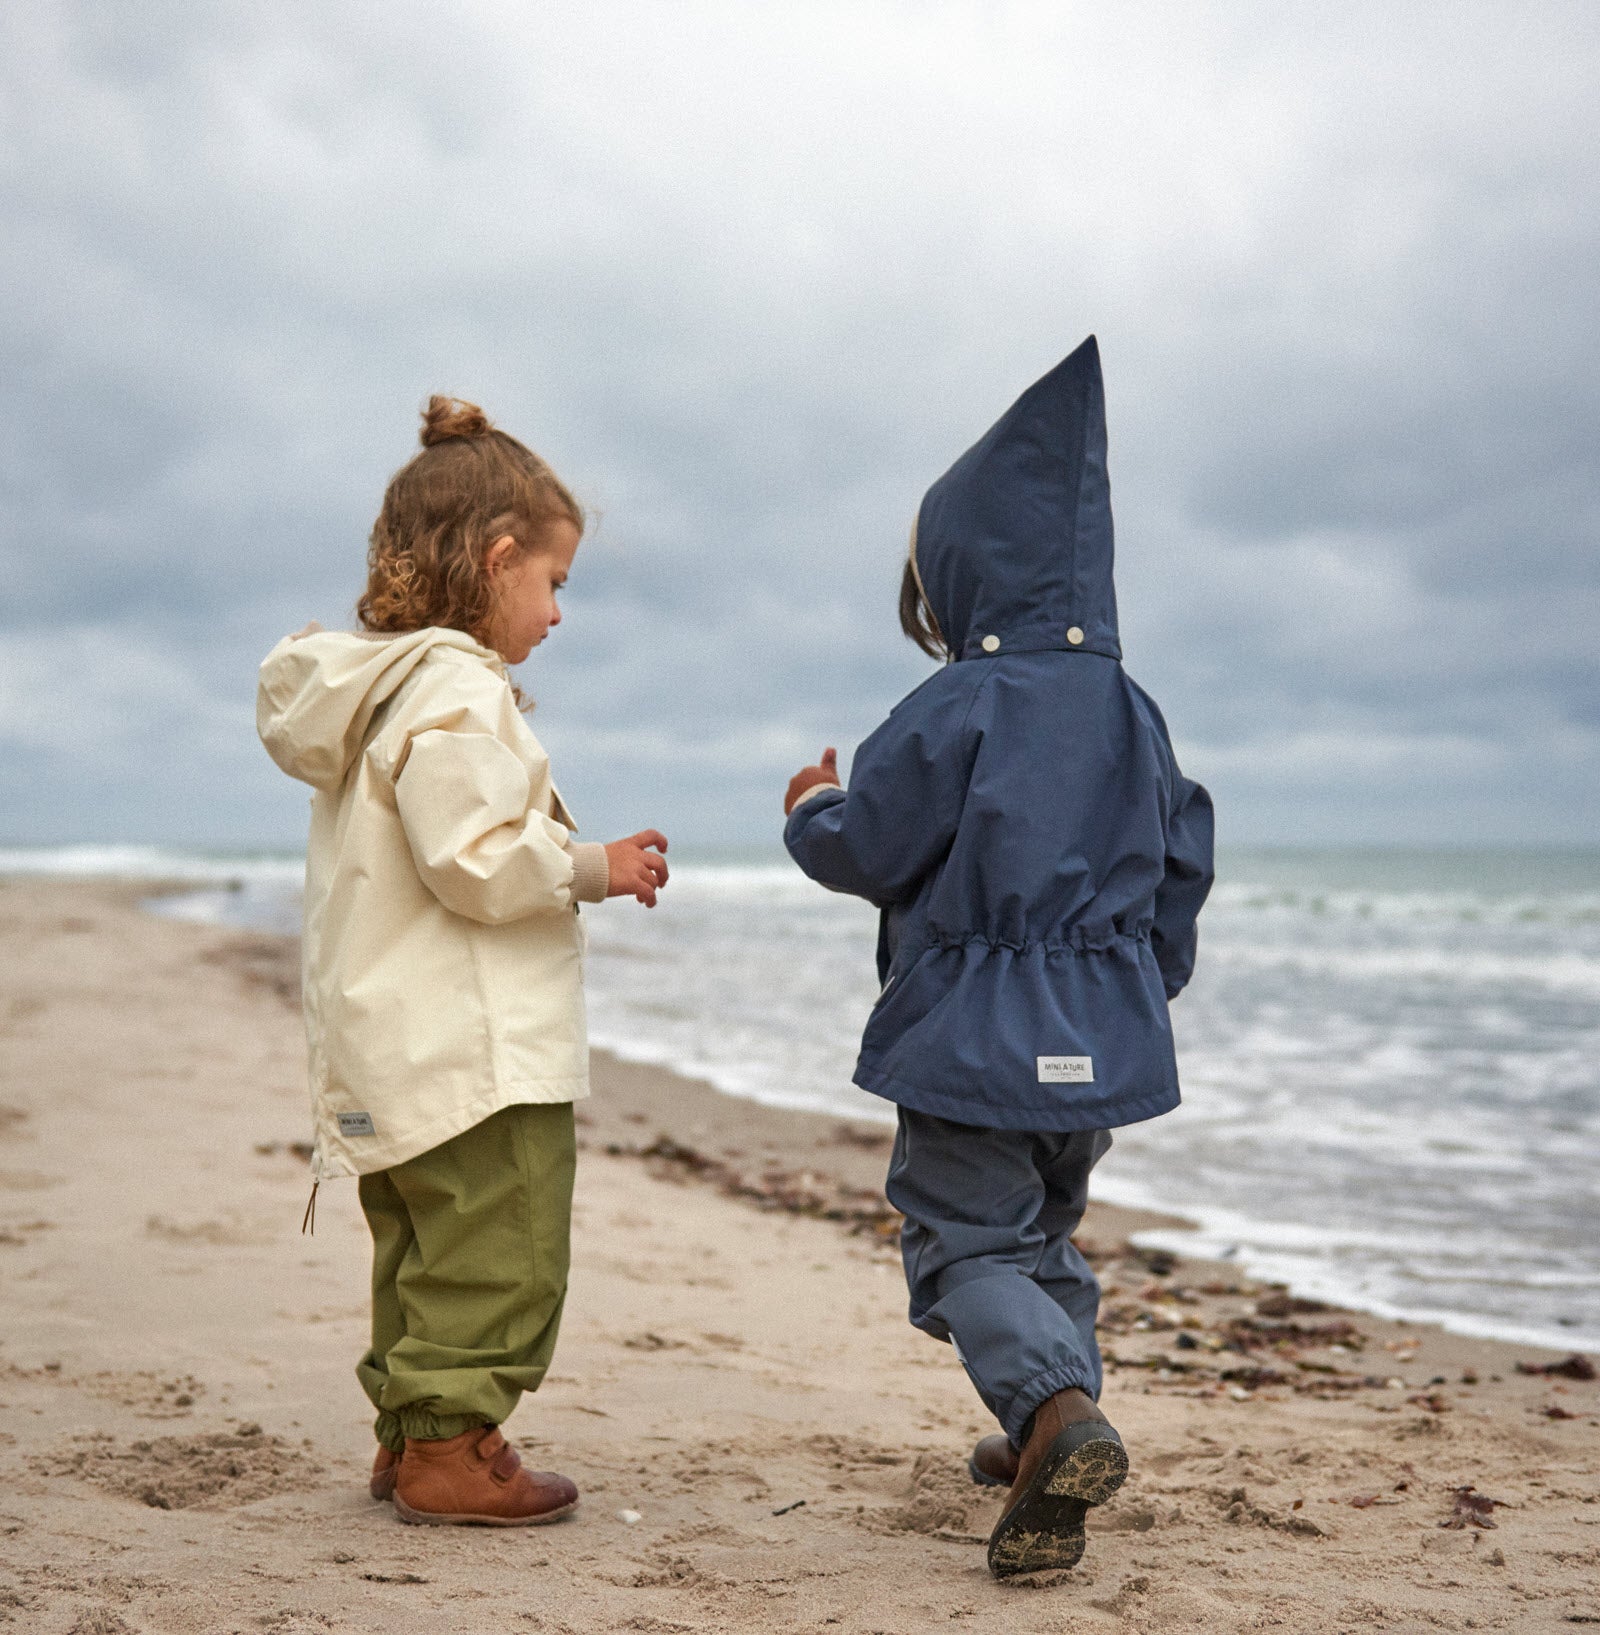 waterproof childrens Certified - MINI A TURE and Wind- outerwear.